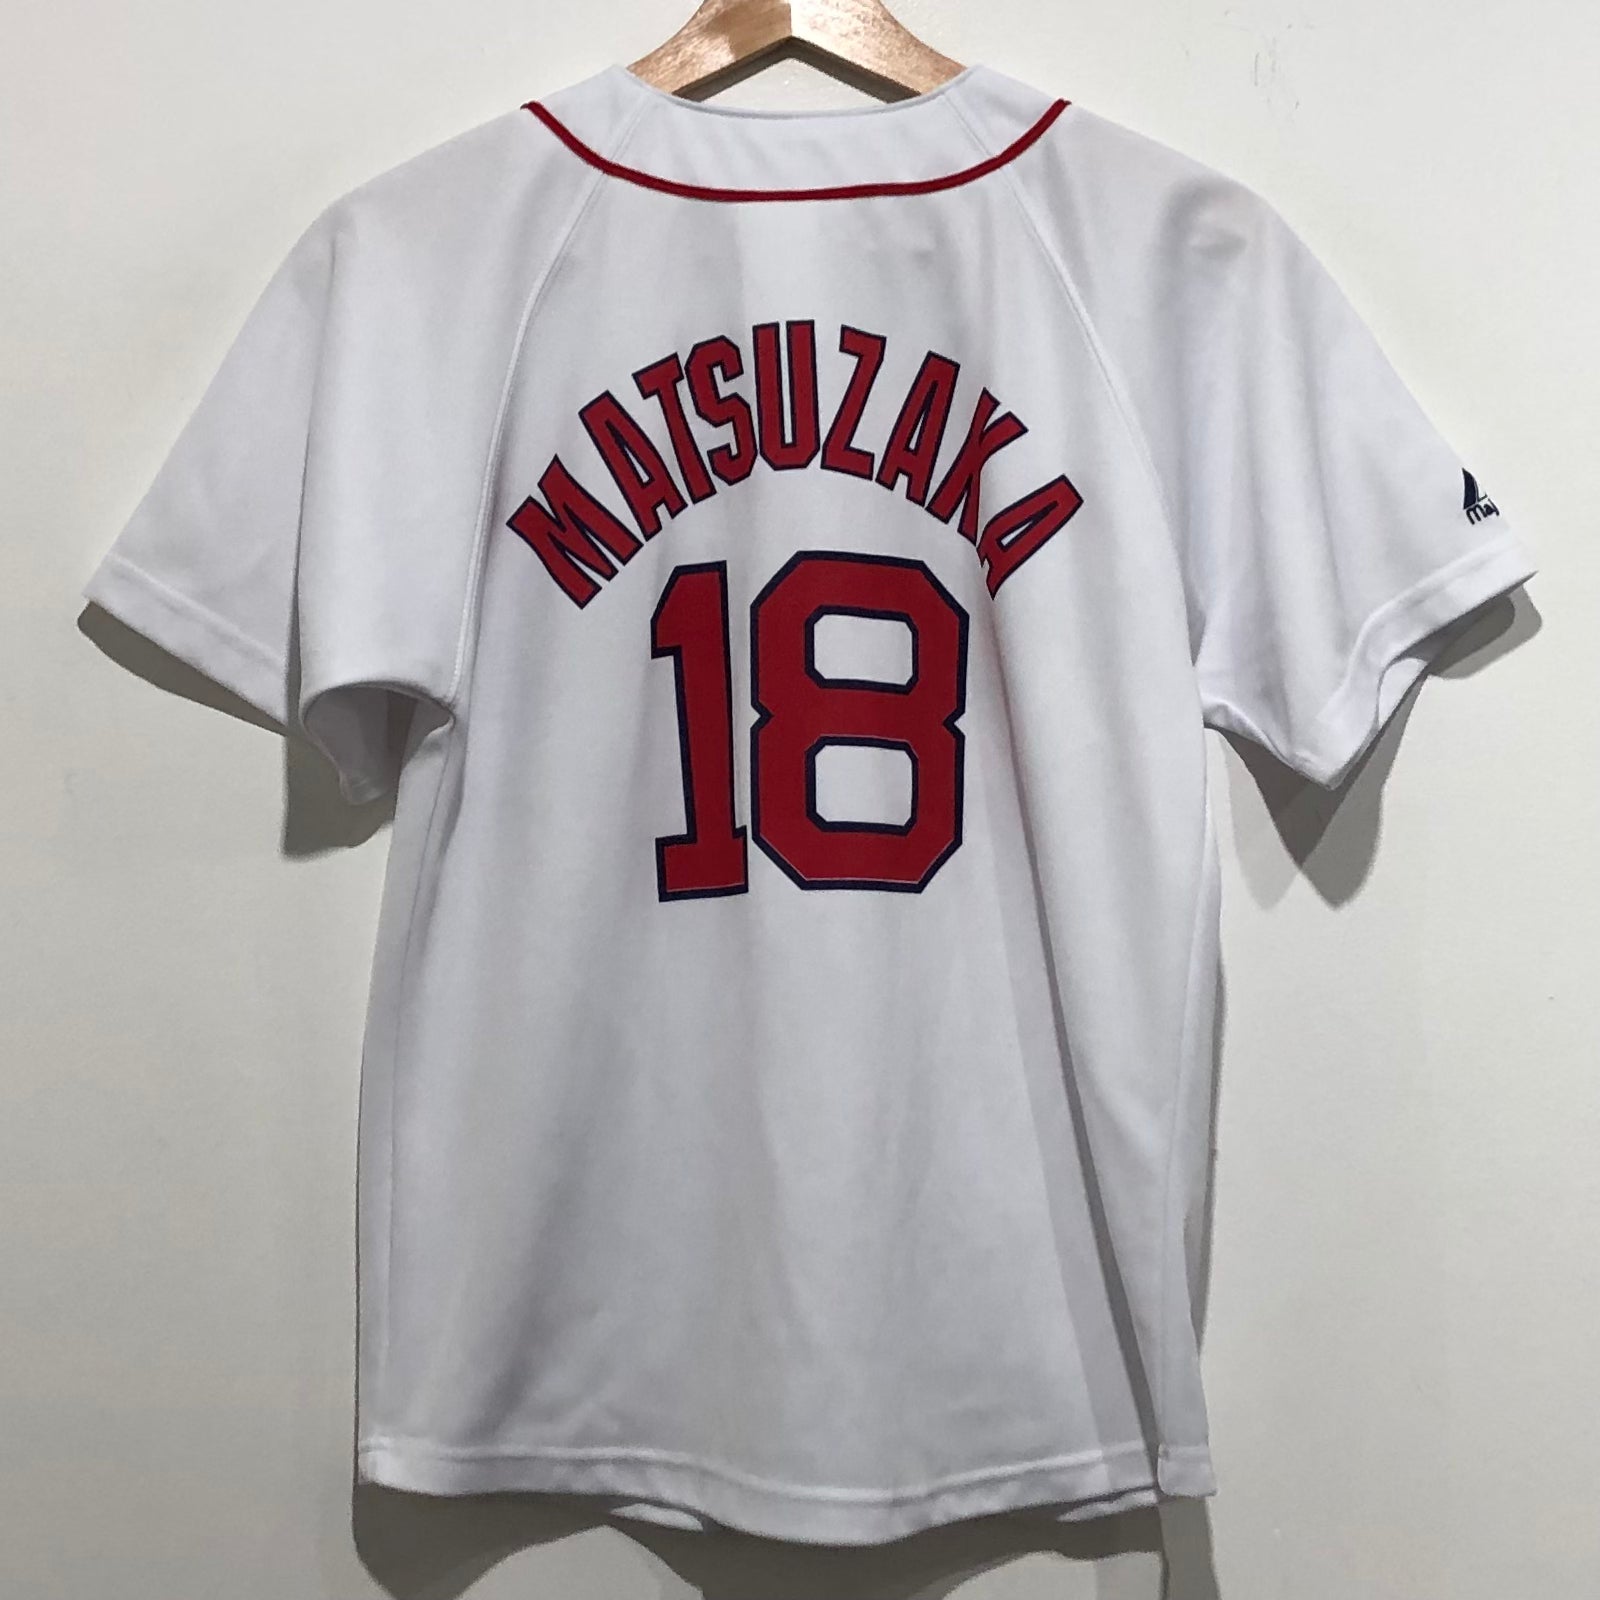 boston red sox jersey youth